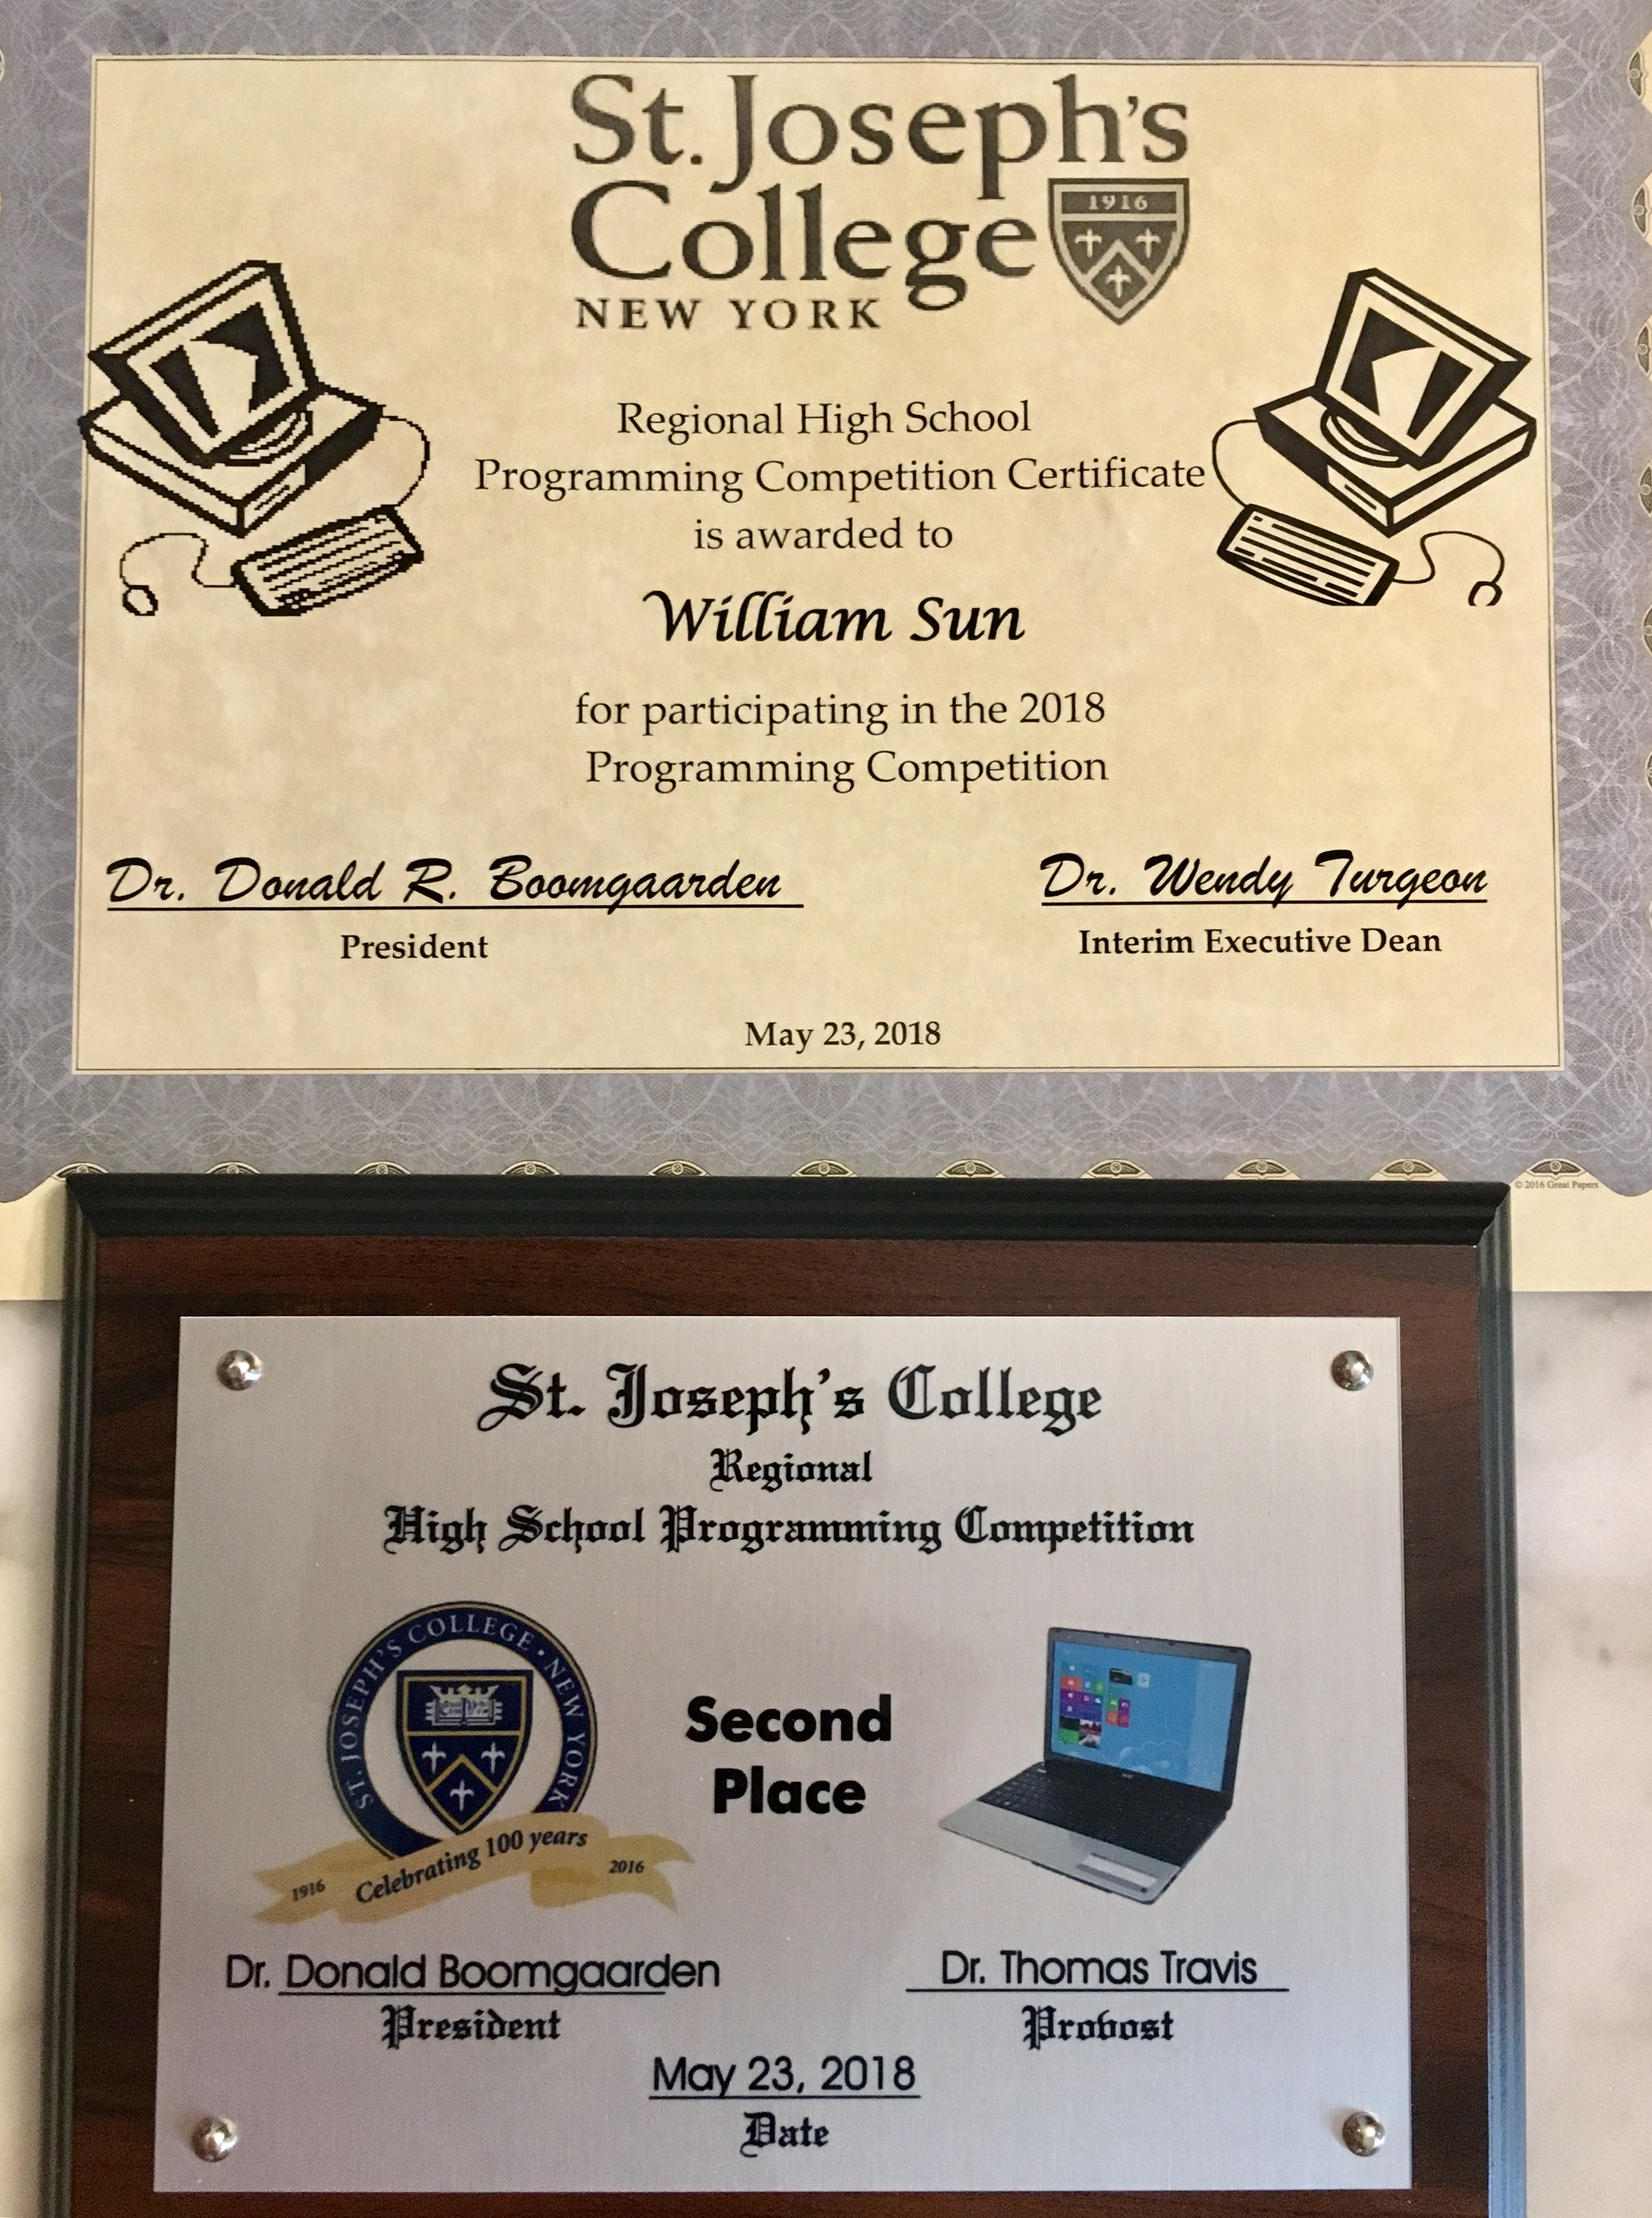 My 2nd place plaque and certificate from 2018